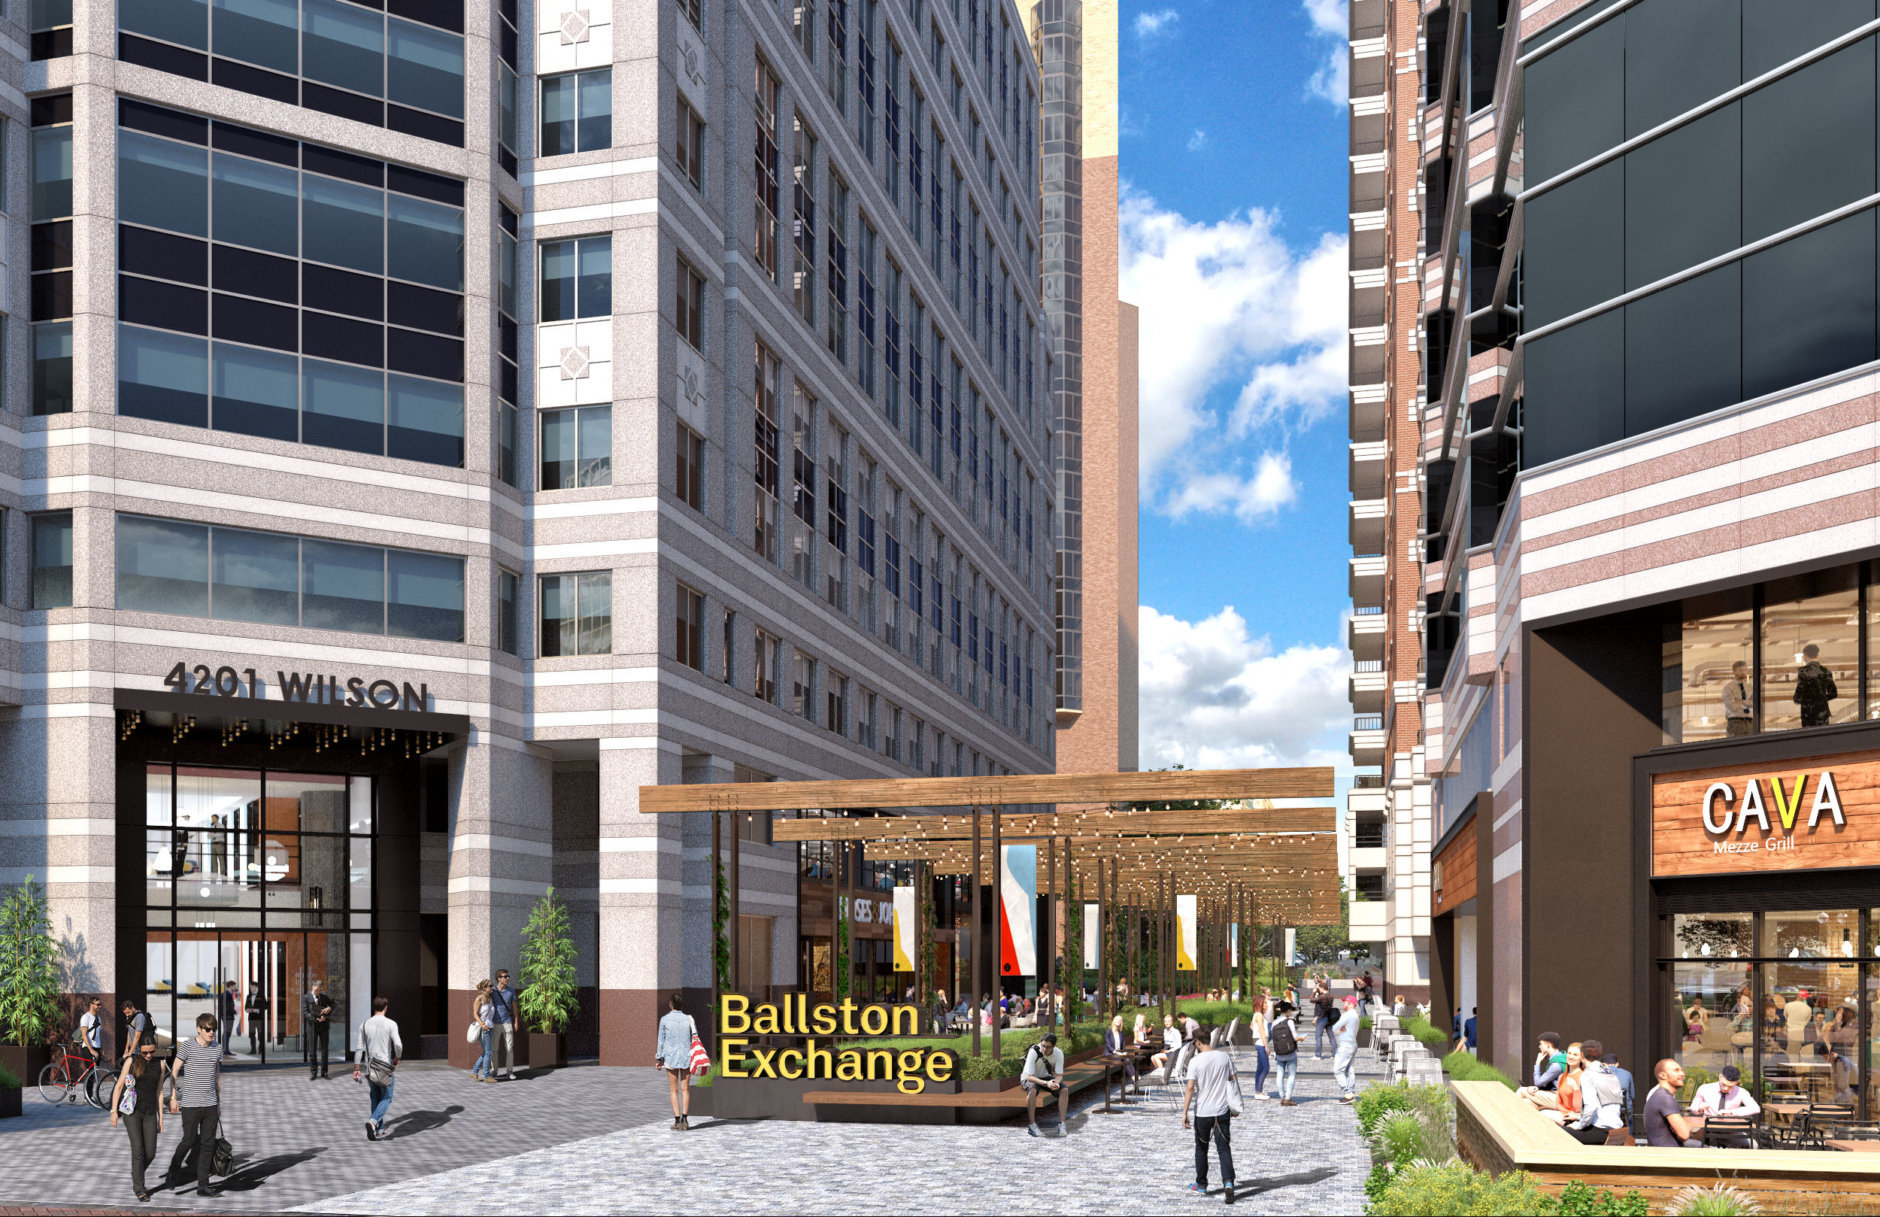 Ballston Exchange was the former home to the National Science Foundation, which moved its headquarters to Alexandria, Virginia, last year. (Credit: Jamestown LP)